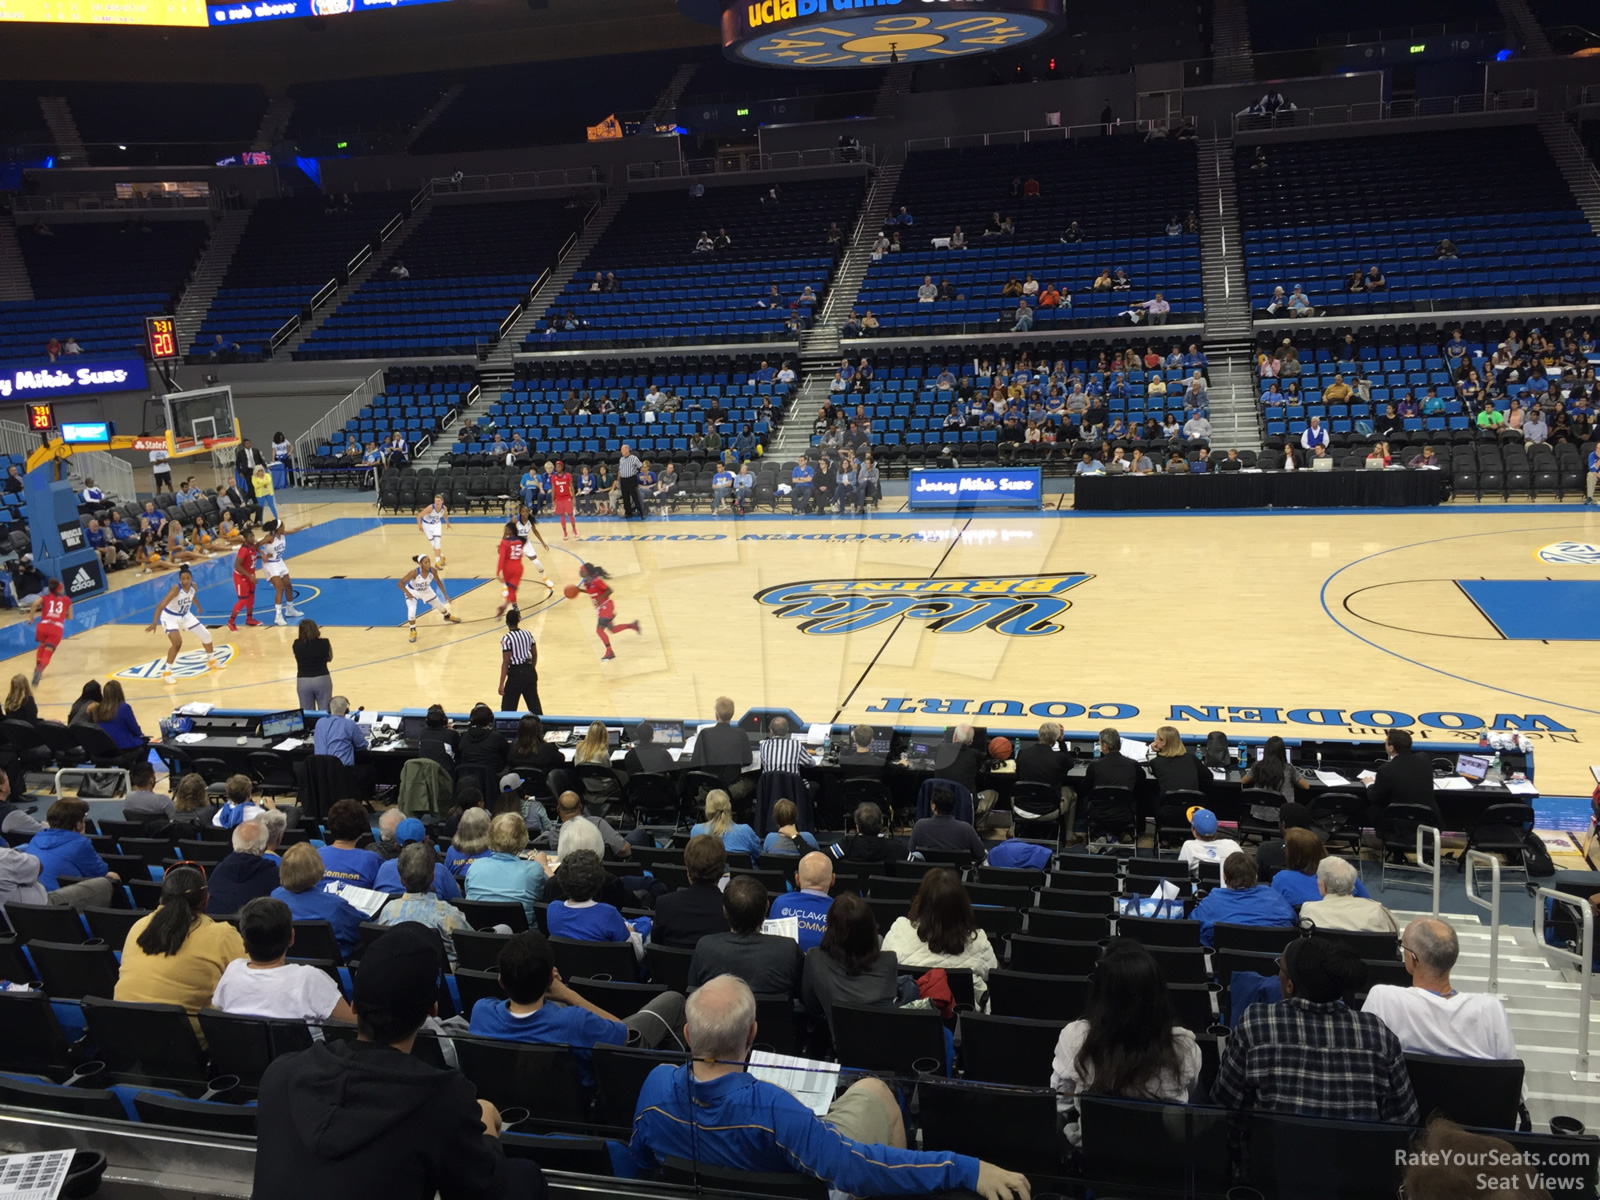 section 102, row 3 seat view  - pauley pavilion